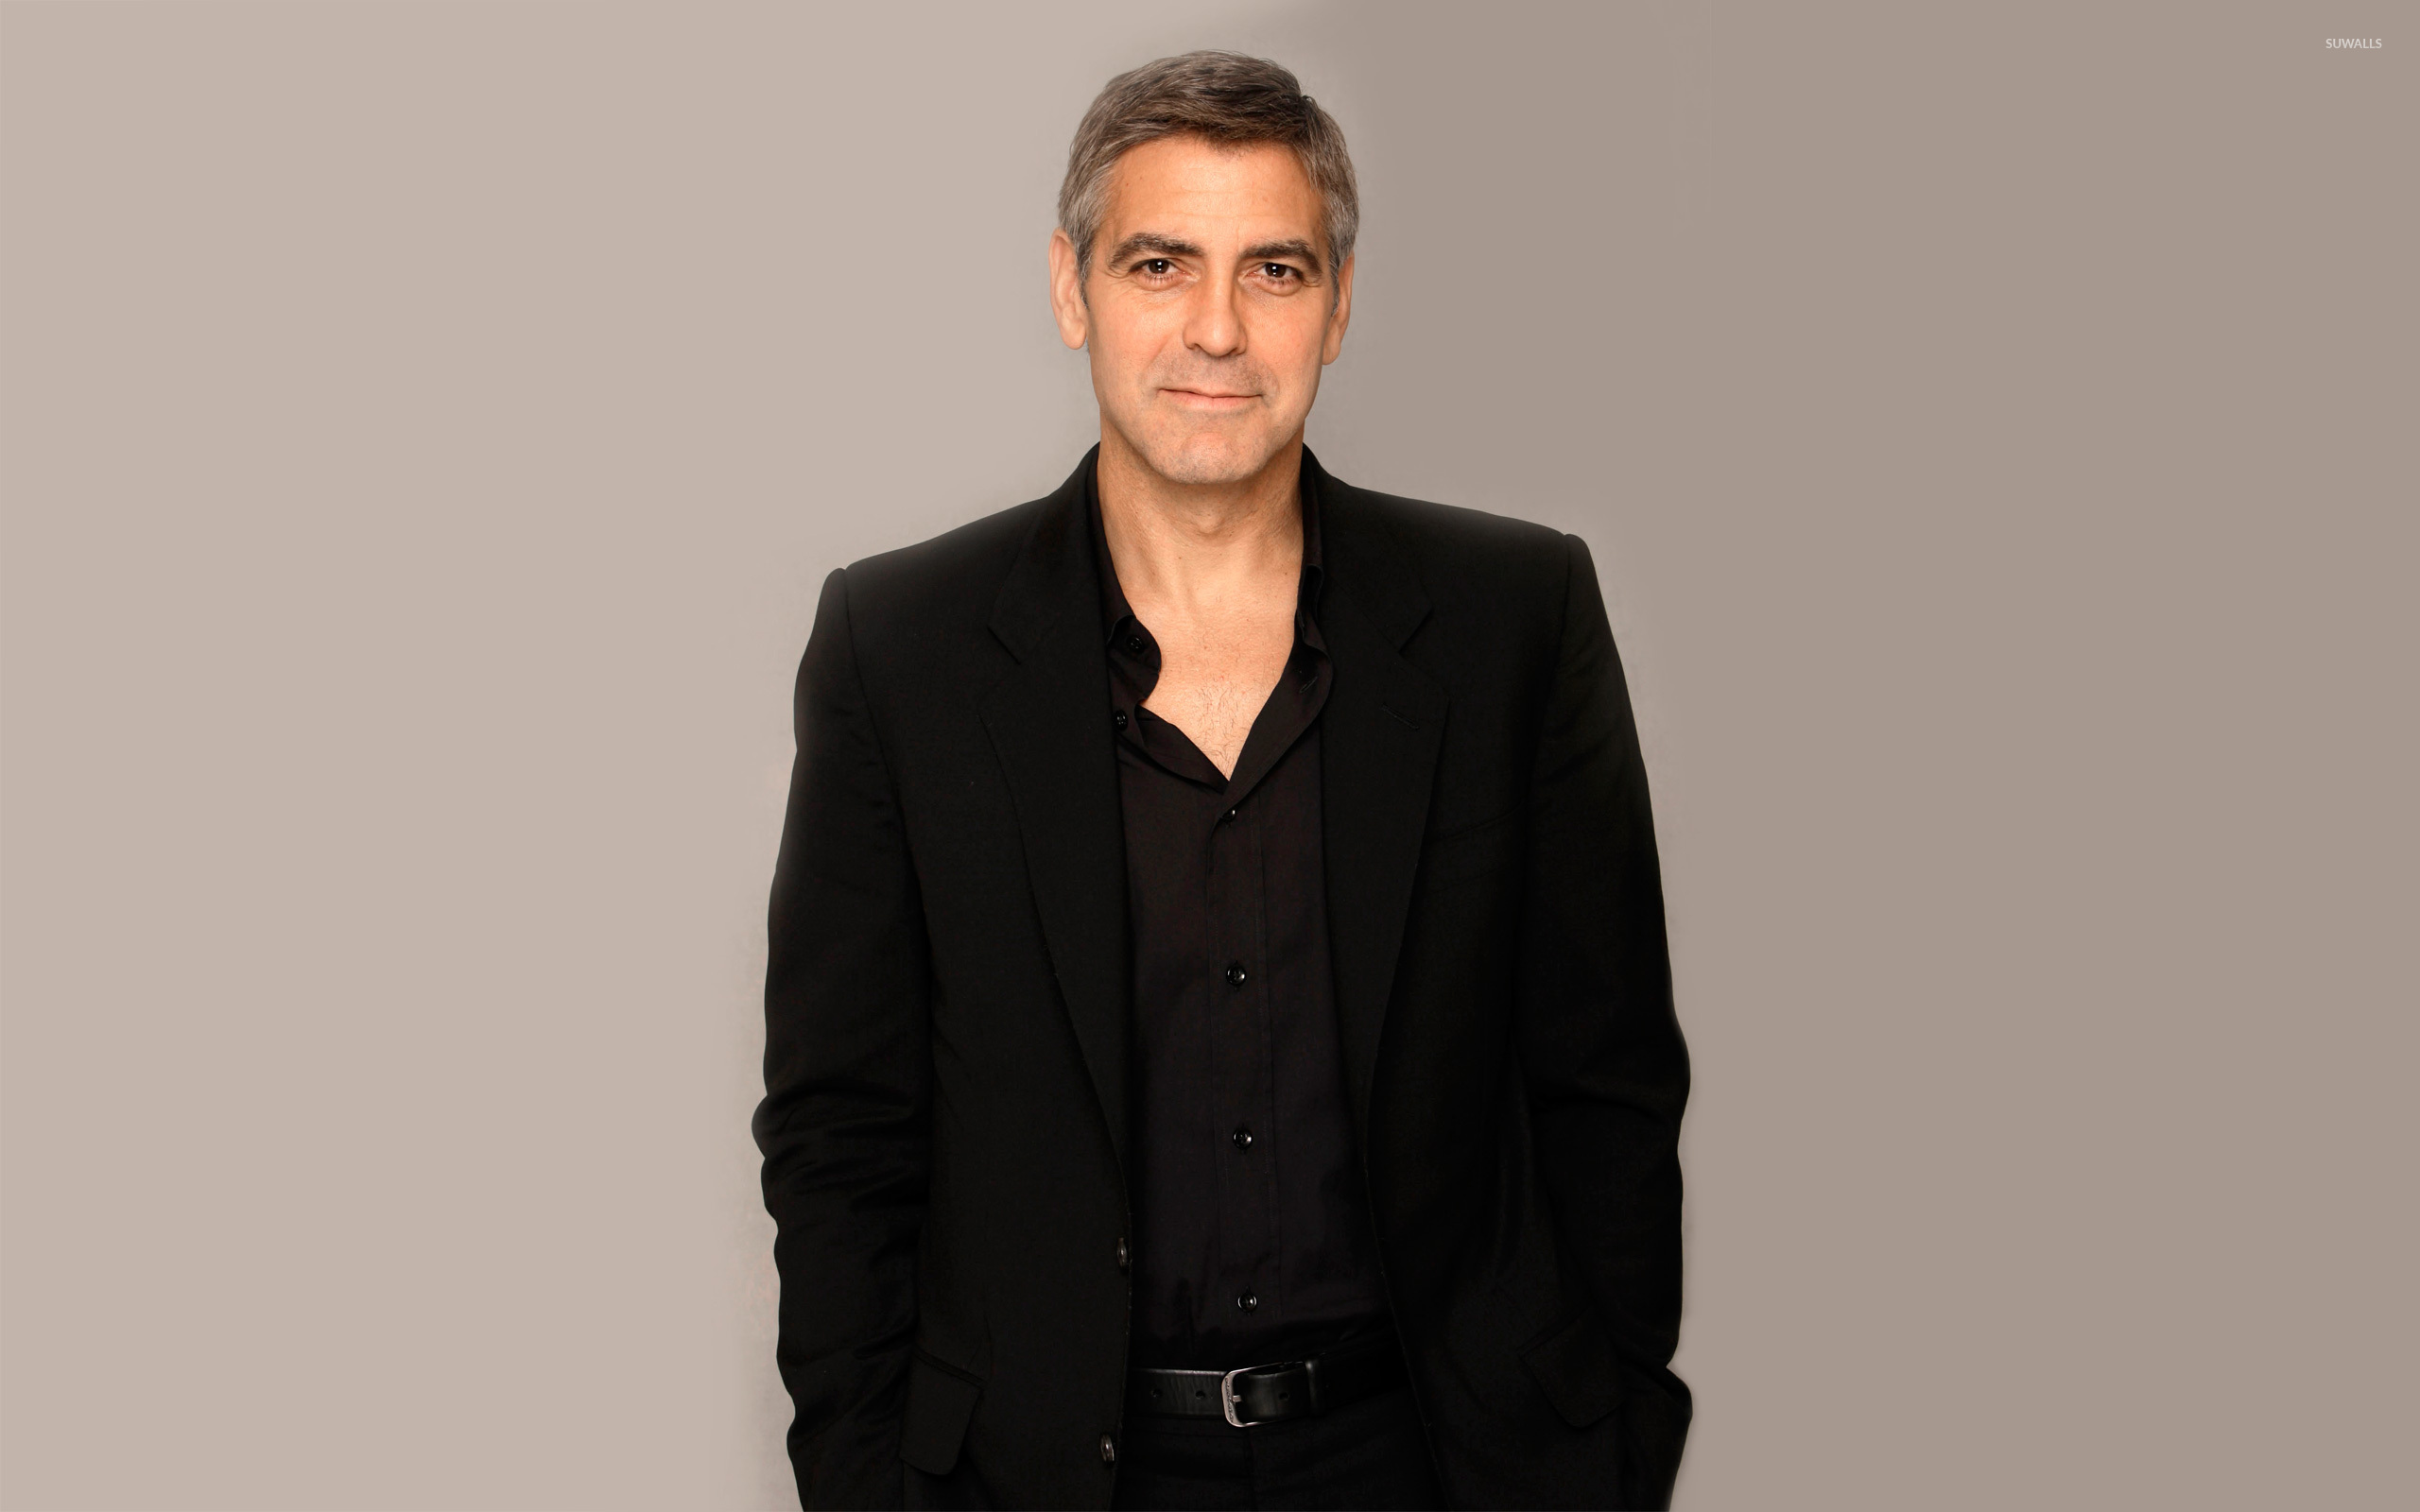 George Clooney Wallpaper Male Celebrity